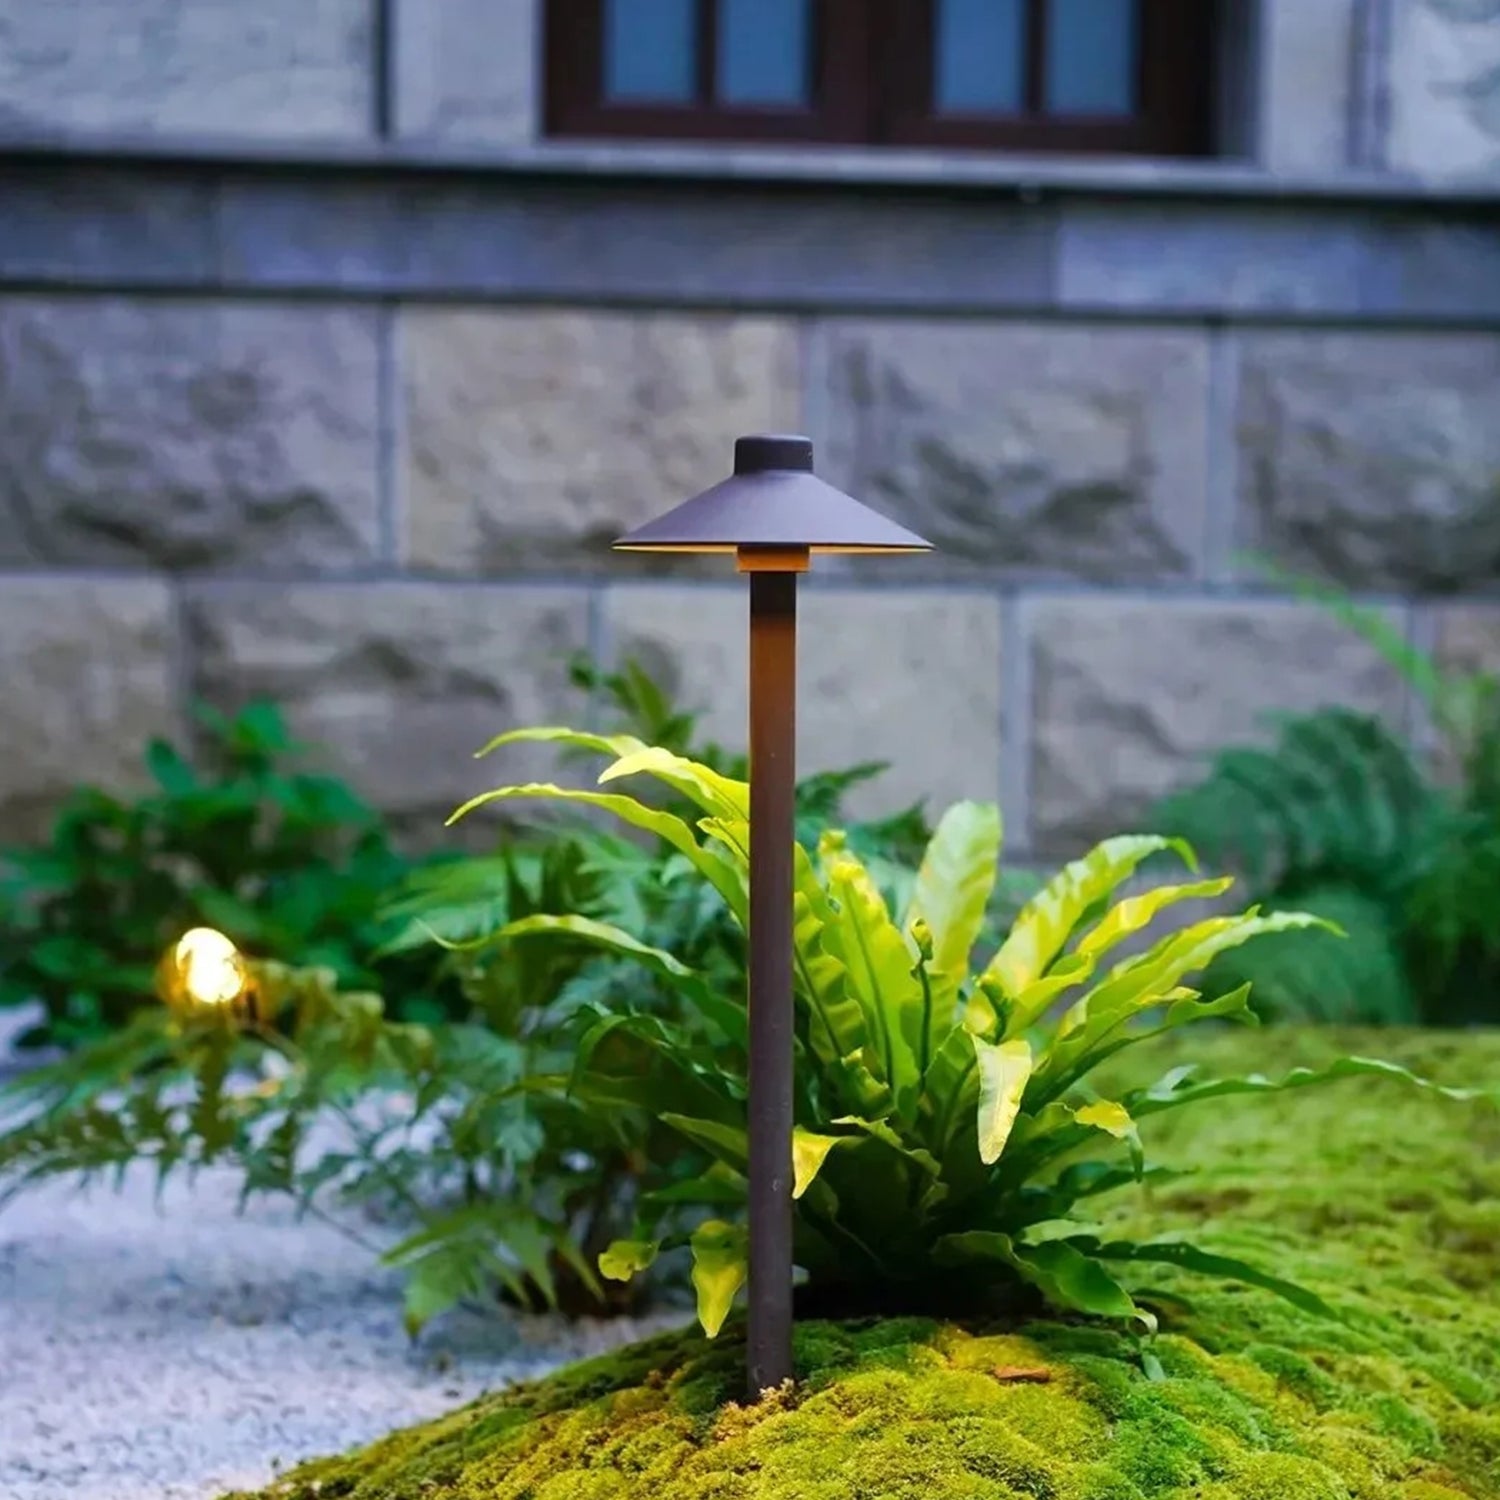 12V low voltage brass garden path light COP602B illuminating a garden with greenery and plants, with a stone wall and window in the background